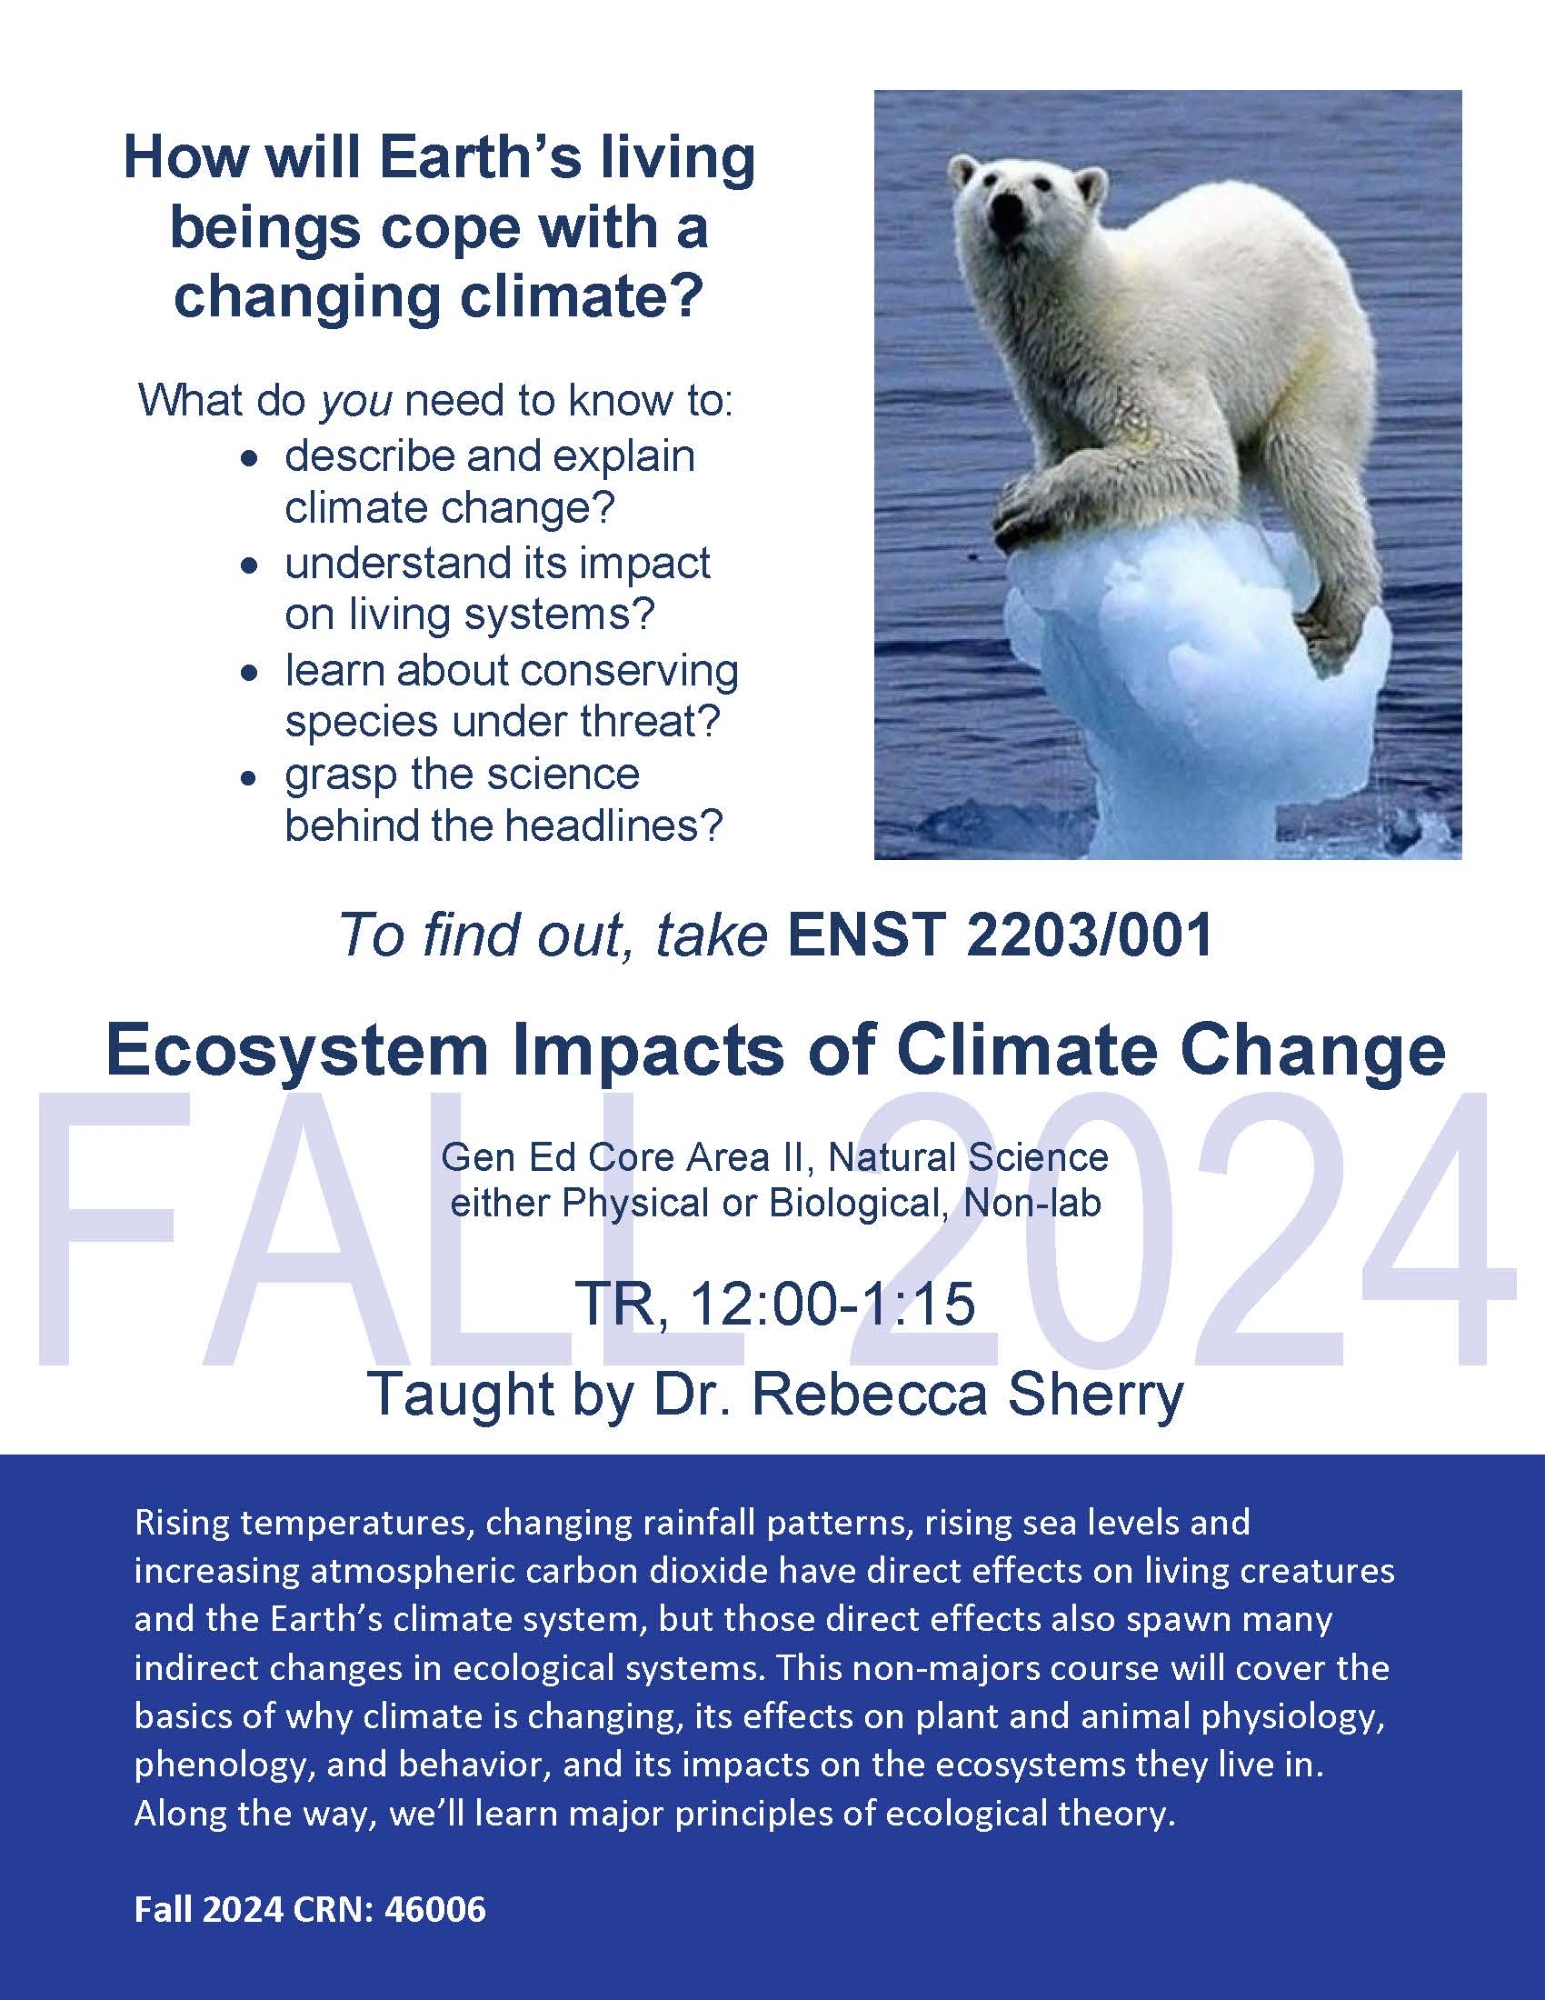 FALL 2024 How will Earth’s living beings cope with a changing climate? What do you need to know to: • describe and explain climate change? • understand its impact on living systems? • learn about conserving species under threat? • grasp the science behind the headlines? To find out, take ENST 2203/001 Ecosystem Impacts of Climate Change Gen Ed Core Area II, Natural Science either Physical or Biological, Non-lab TR, 12:00-1:15 Taught by Dr. Rebecca Sherry Rising temperatures, changing rainfall patterns, rising sea levels and increasing atmospheric carbon dioxide have direct effects on living creatures and the Earth’s climate system, but those direct effects also spawn many indirect changes in ecological systems. This non-majors course will cover the basics of why climate is changing, its effects on plant and animal physiology, phenology, and behavior, and its impacts on the ecosystems they live in. Along the way, we’ll learn major principles of ecological theory. Fall 2024 CRN: 46006